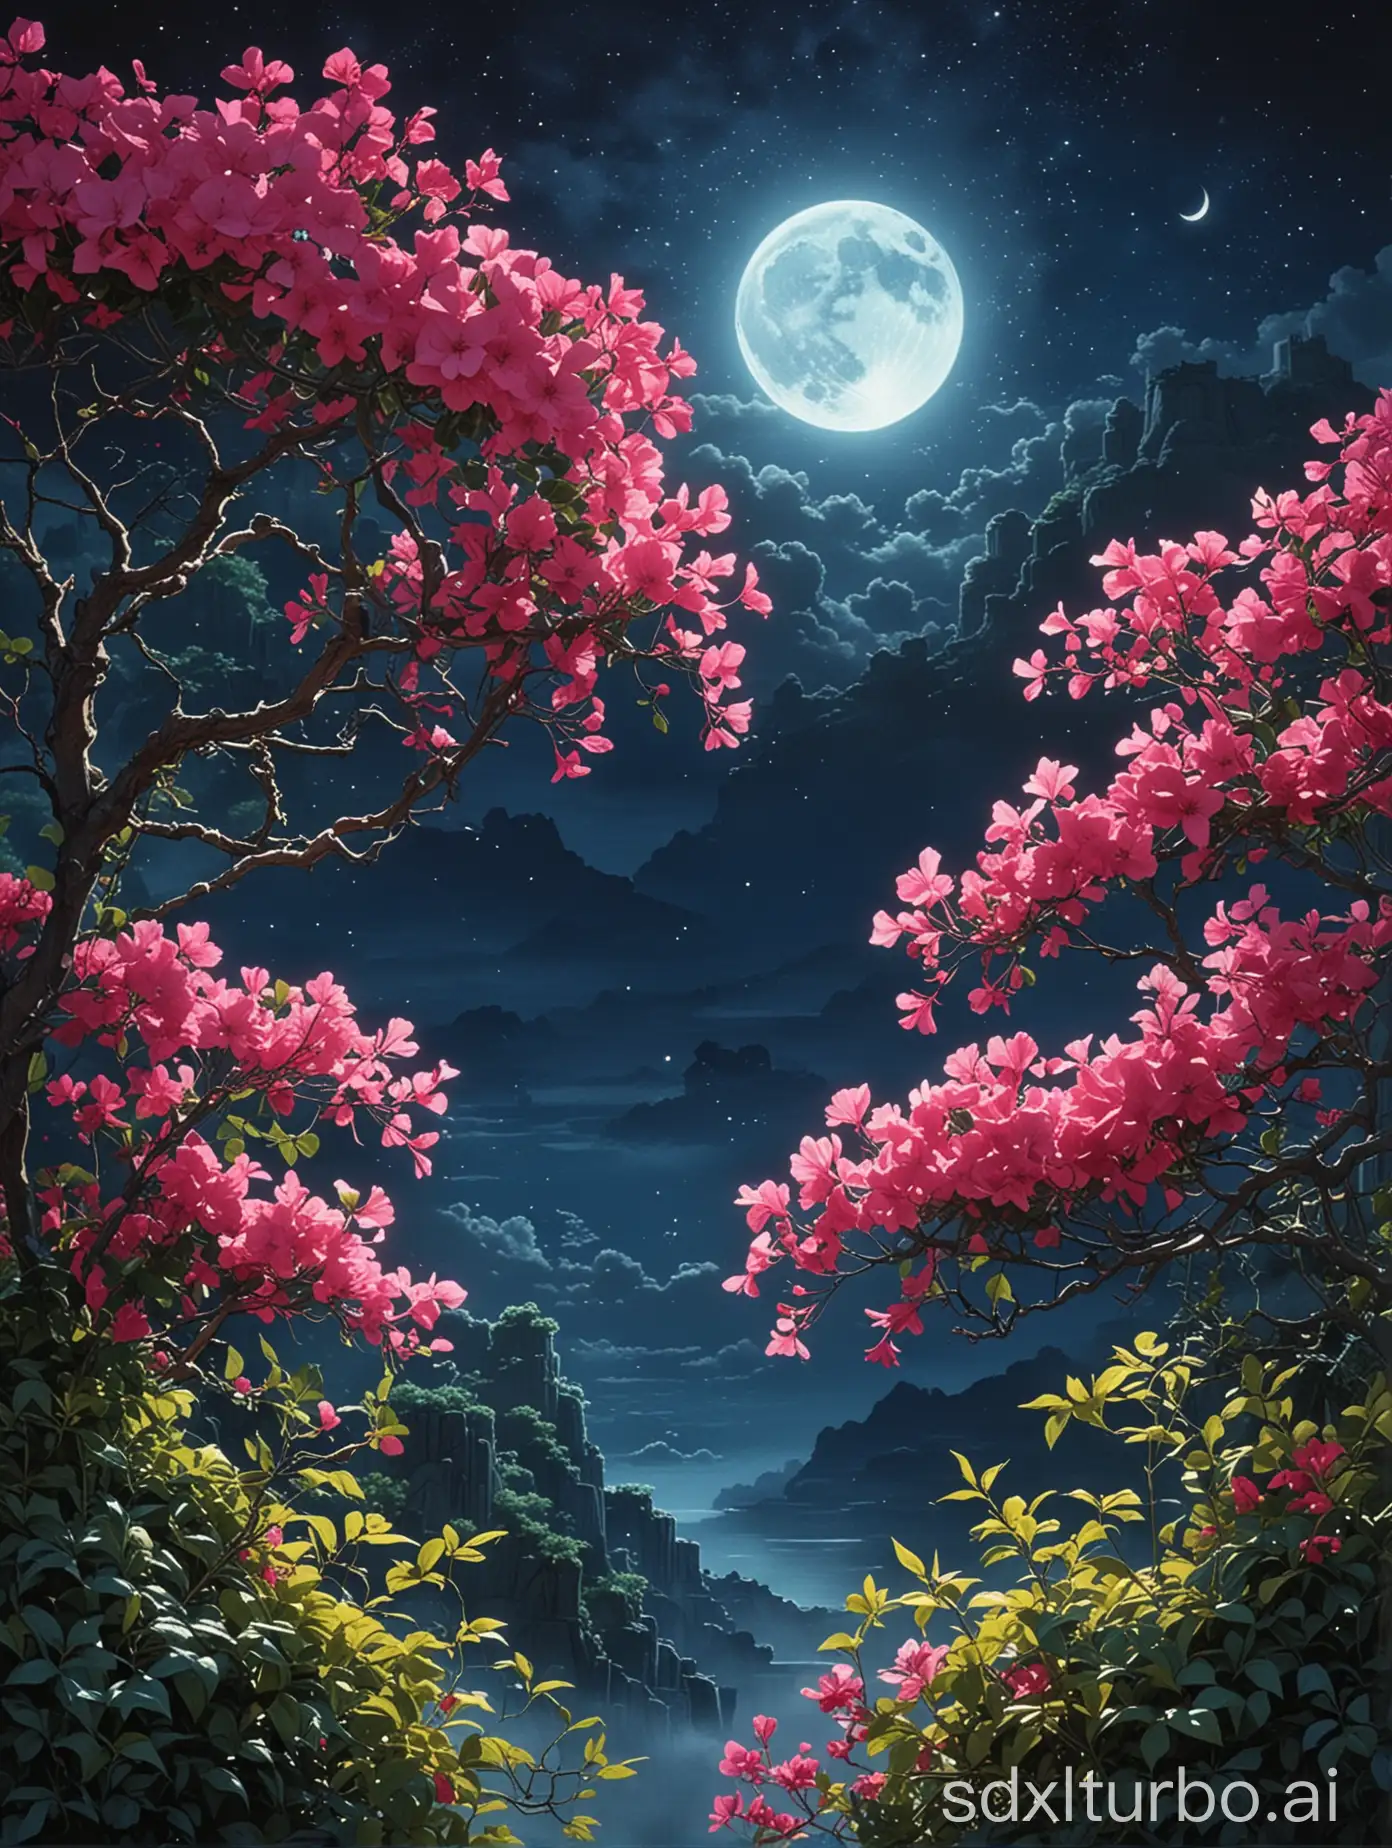 Tranquil-Night-Sky-with-Pink-Bougainvillea-and-Full-Moon